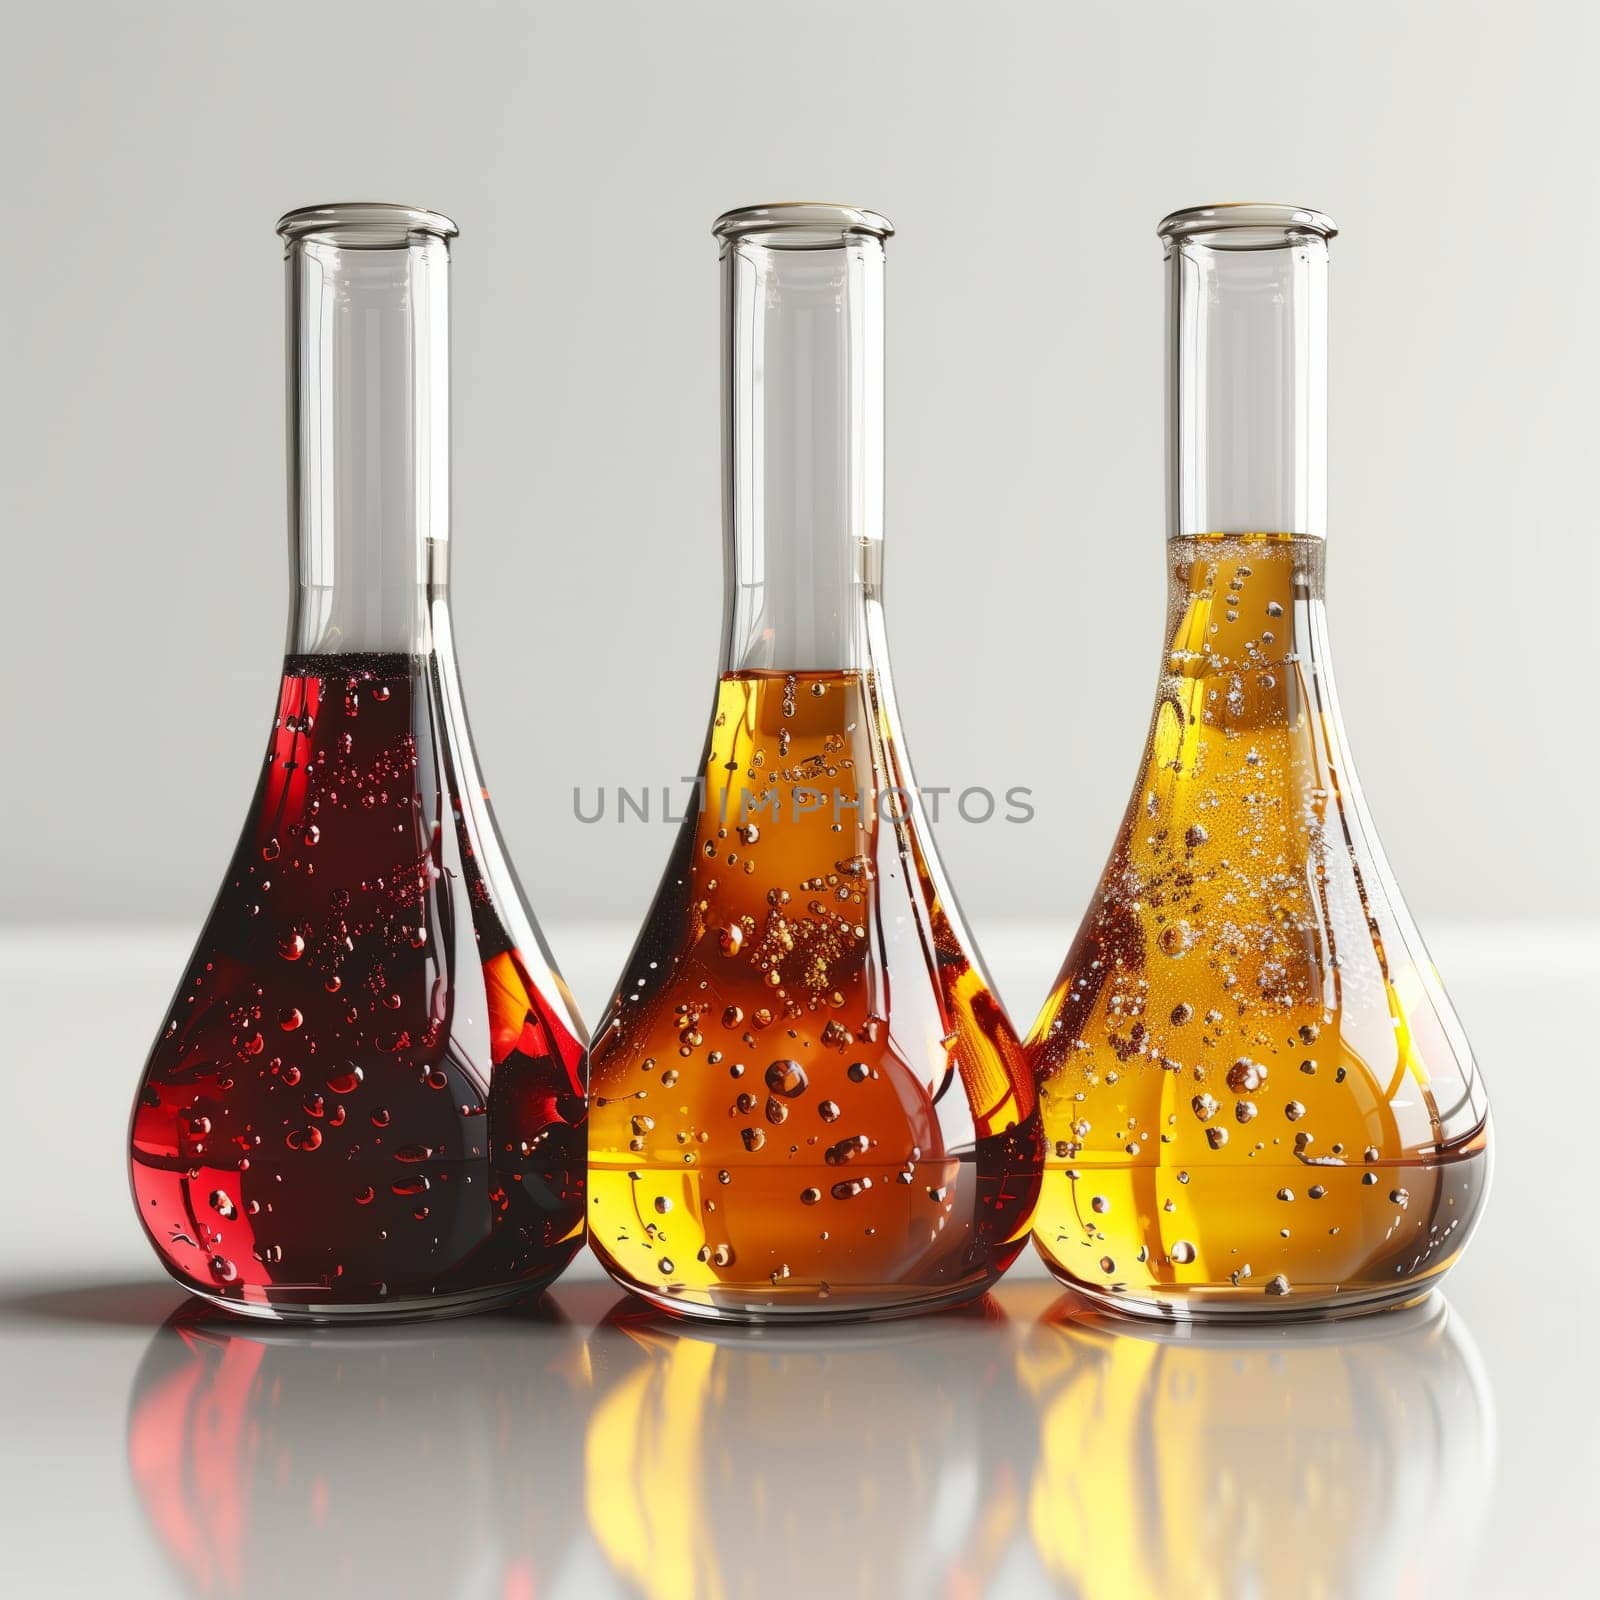 Three beakers filled with various colored liquids are displayed on a table, showcasing different hues and textures of the fluid ingredients